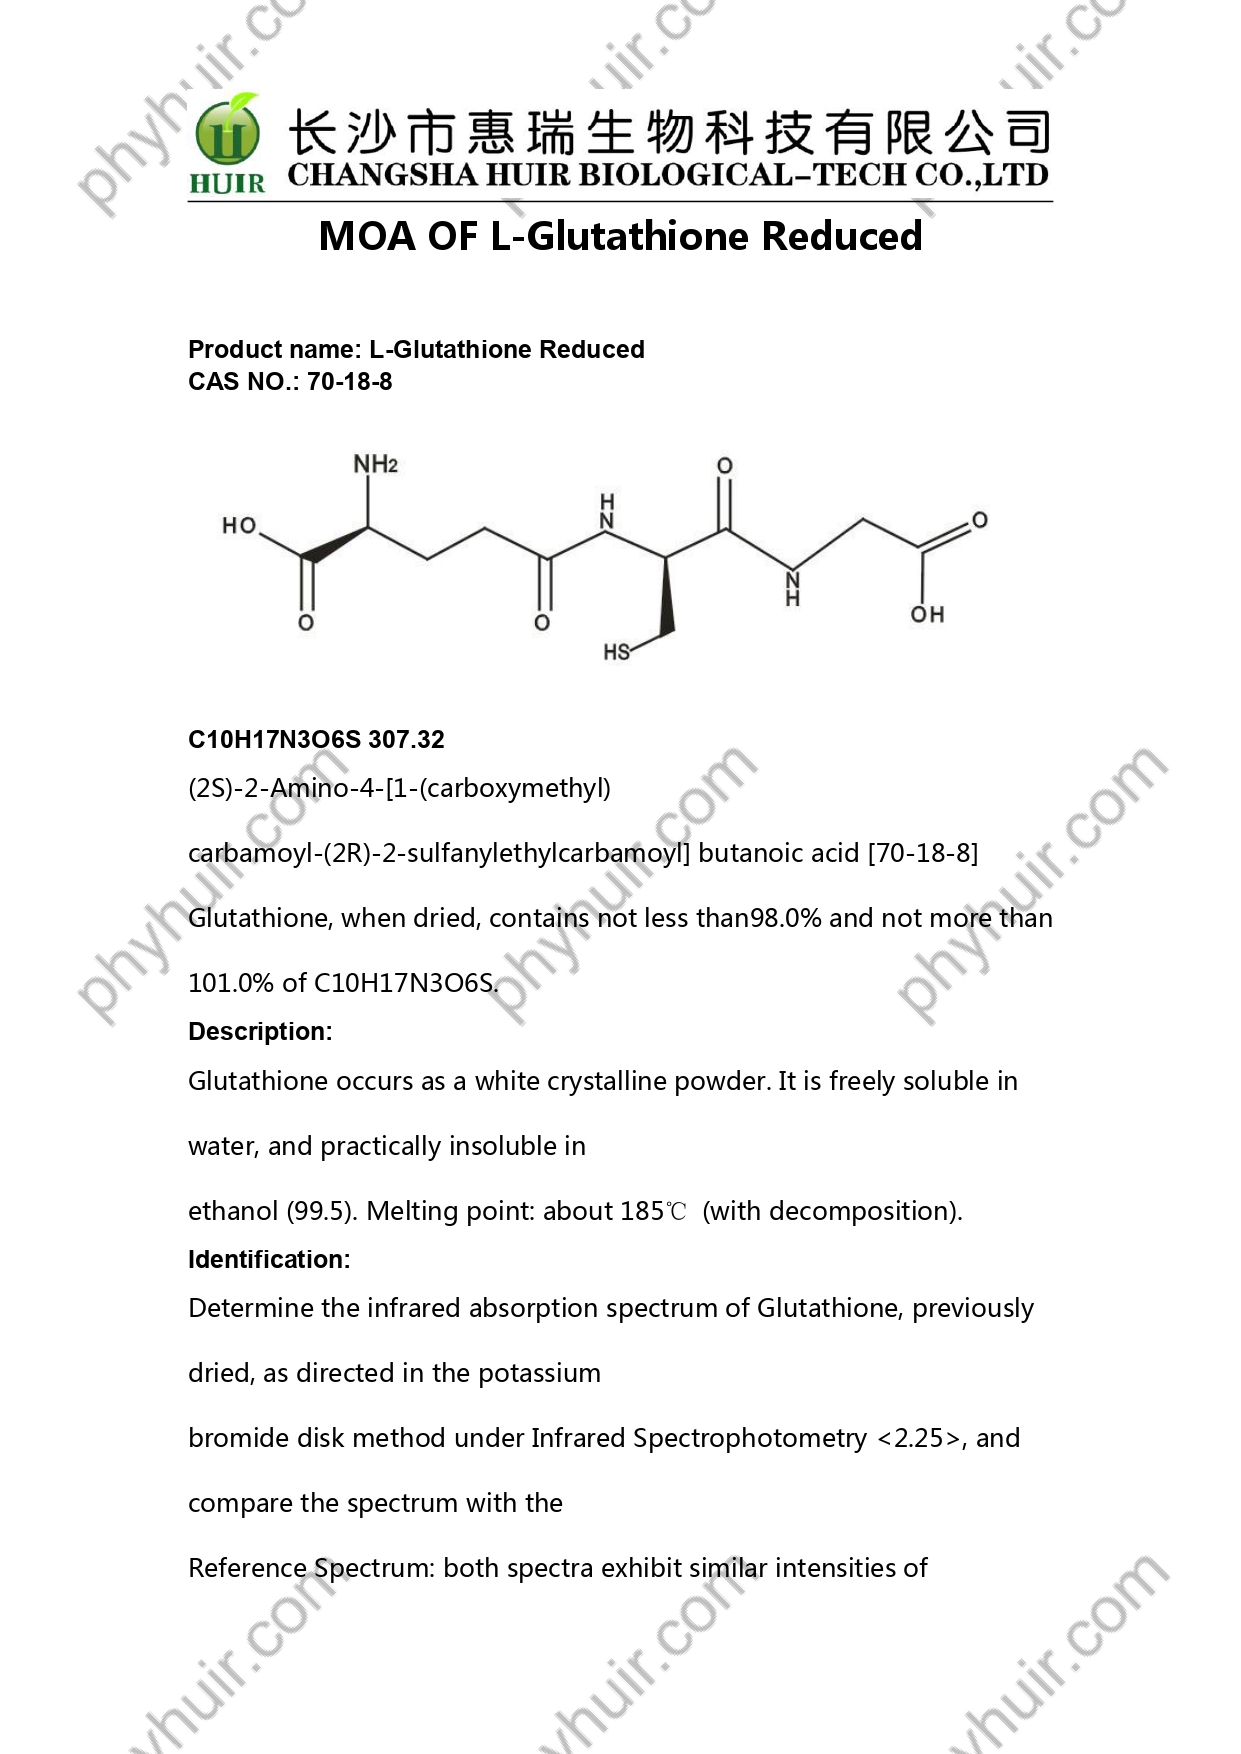 MOA of L- Glutathione reduced_watermark_page-0001.jpg